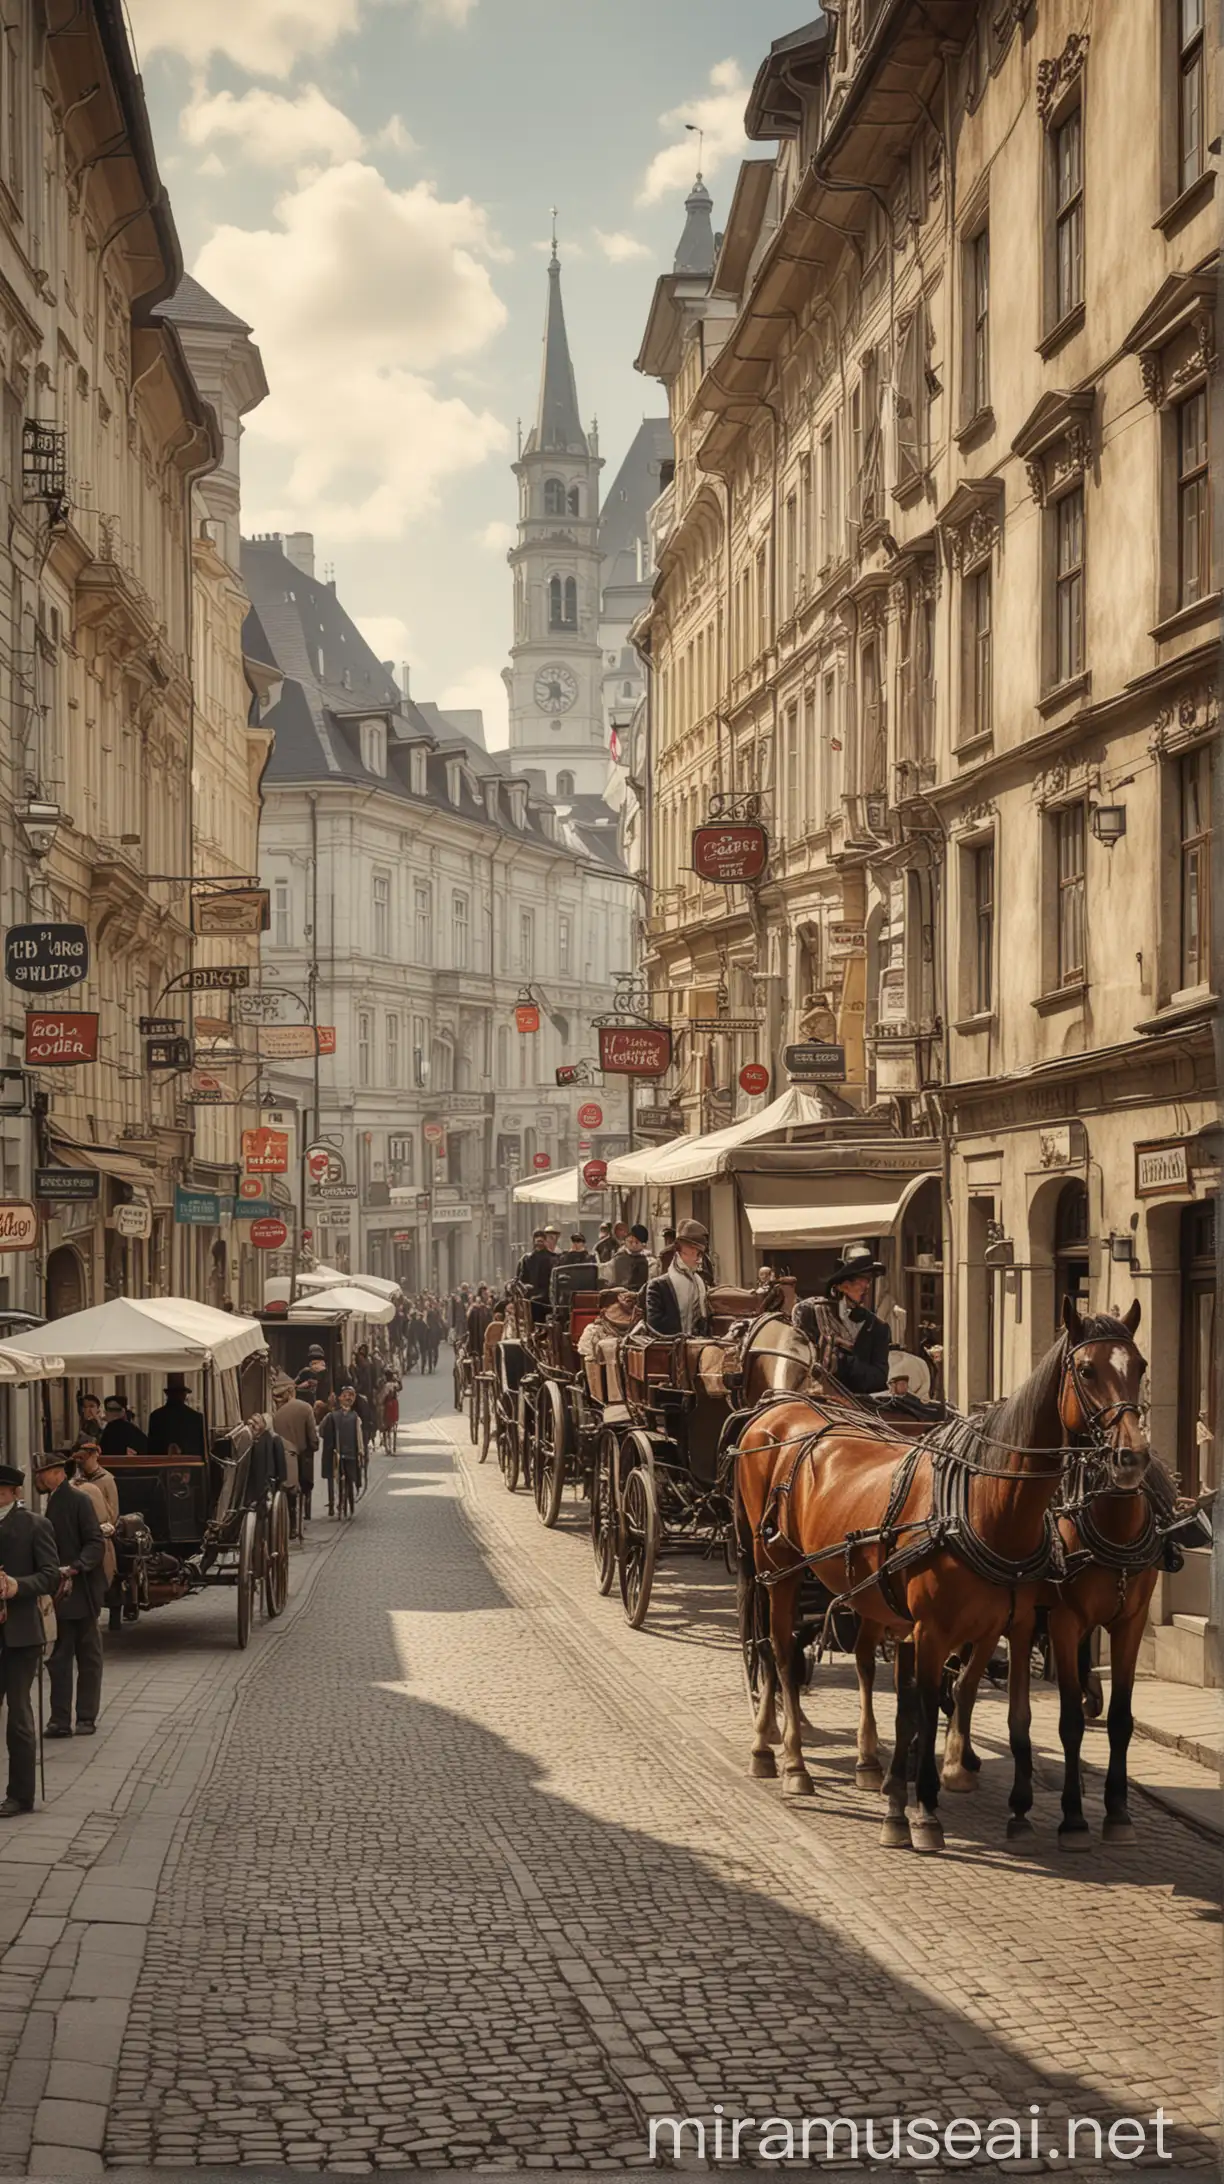 A vintage street scene of 1900s Linz, Austria, with horse-drawn carriages and people bustling about. hyper realistic